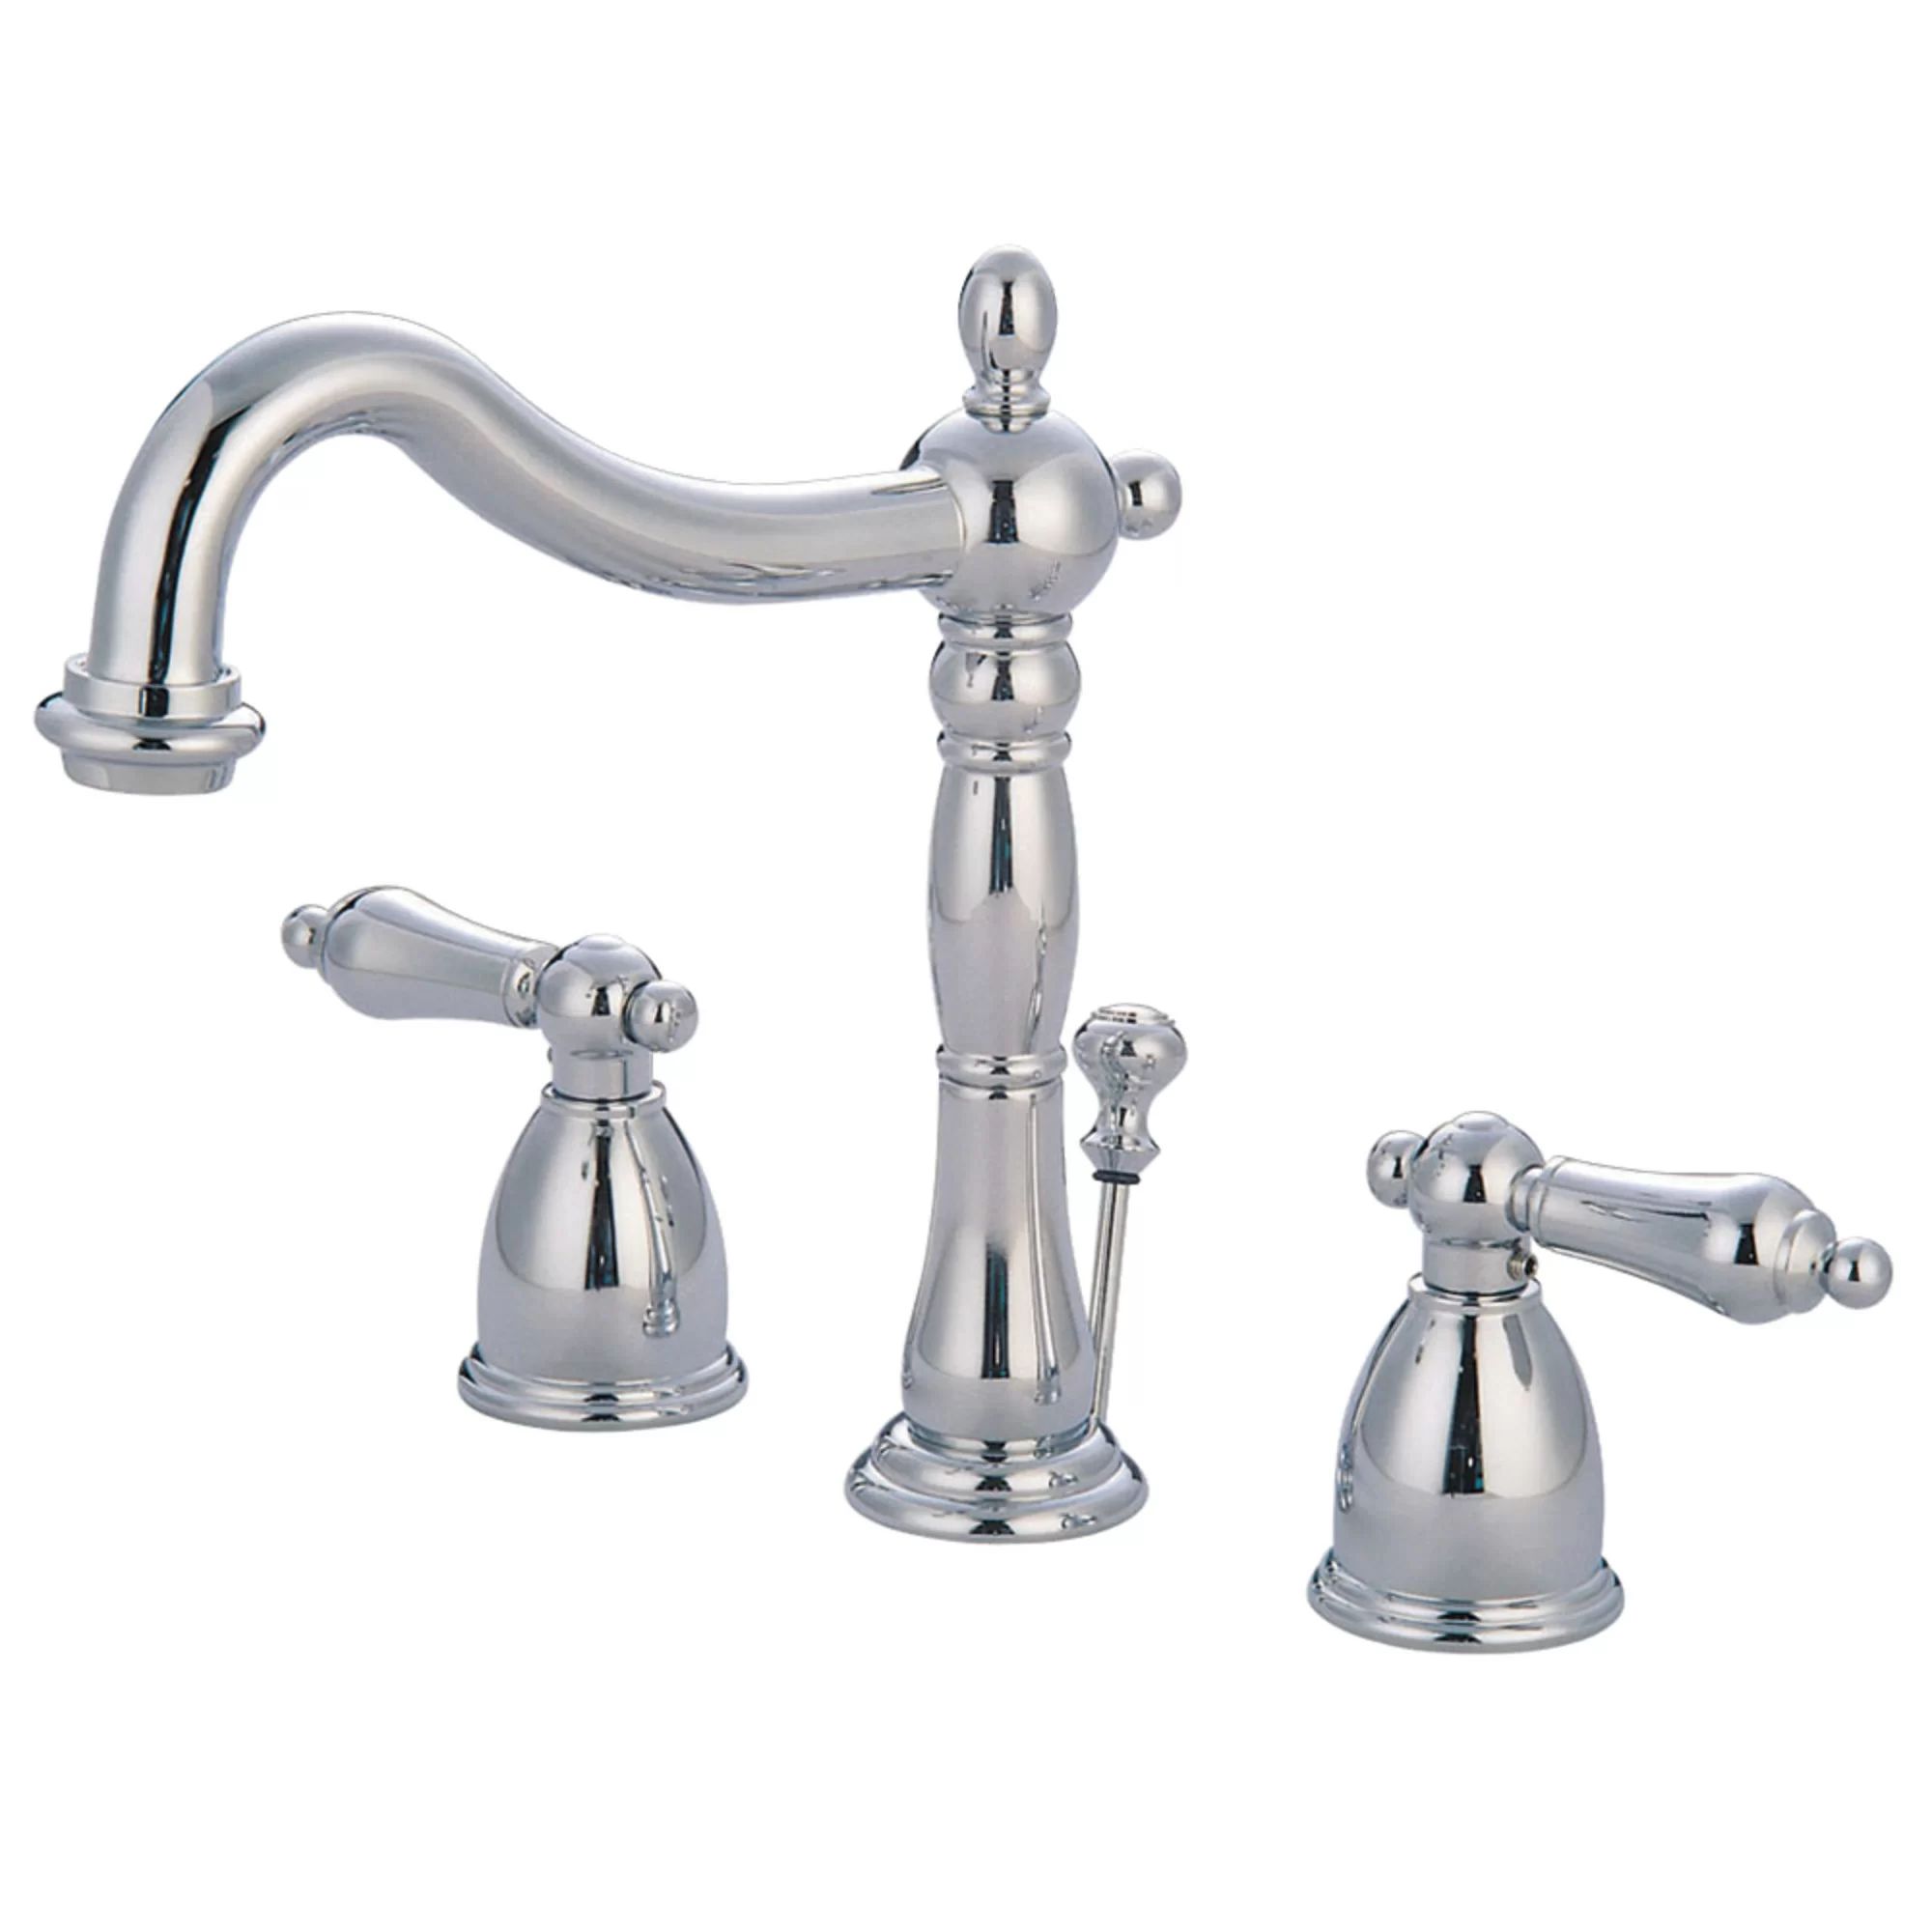 KB1971AL Heritage Widespread Faucet 2-handle Bathroom Faucet with Drain Assembly | Wayfair North America